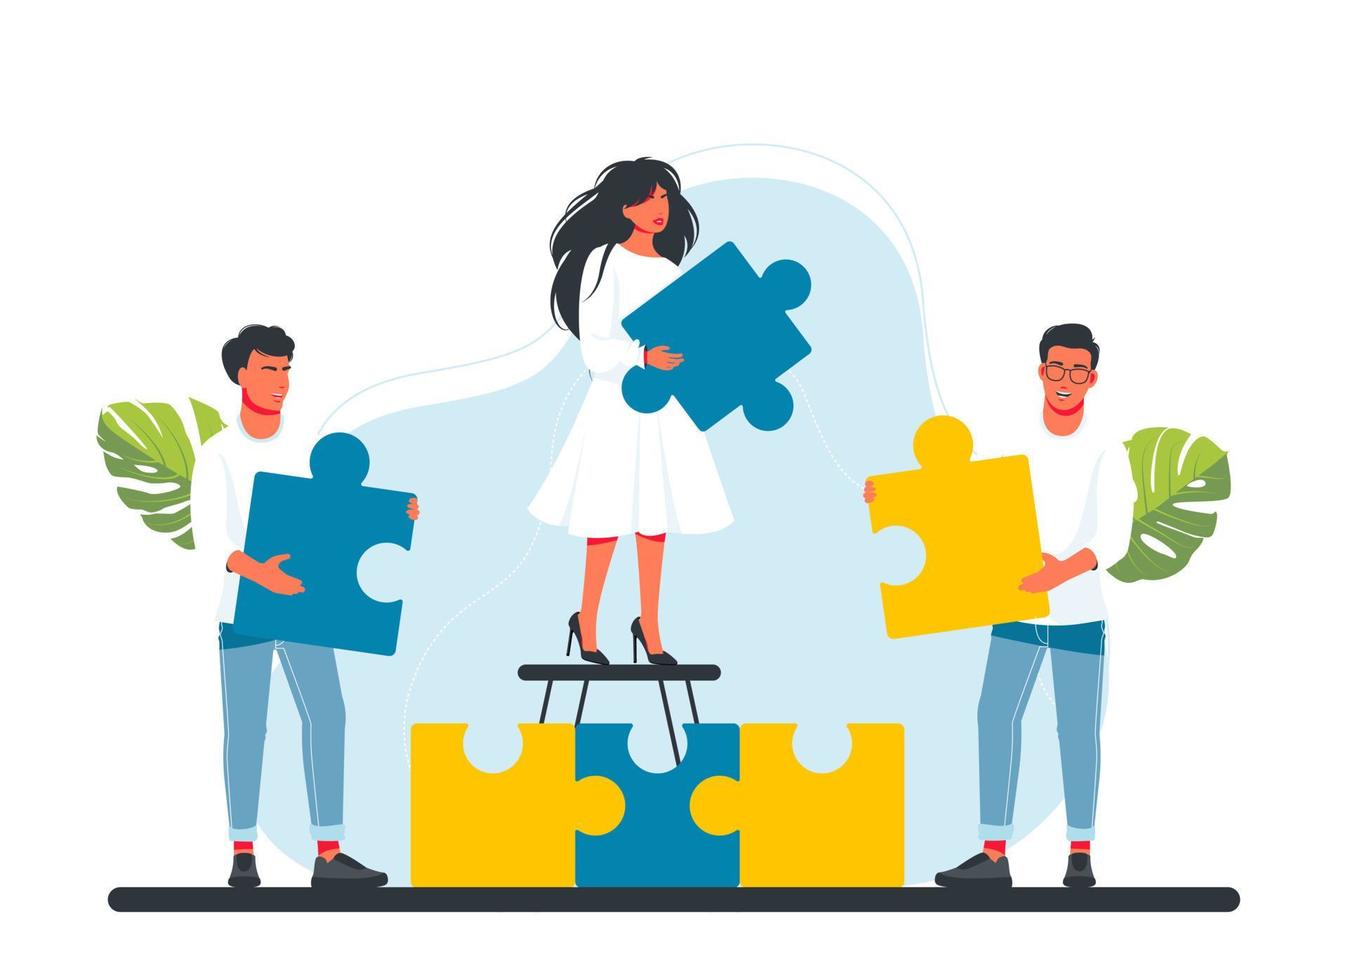 People collect a puzzle, a mosaic. Colleagues holding large puzzle pieces. A Successful partnership, communication, collaboration metaphor. Teamwork, business cooperation concept. Vector illustration